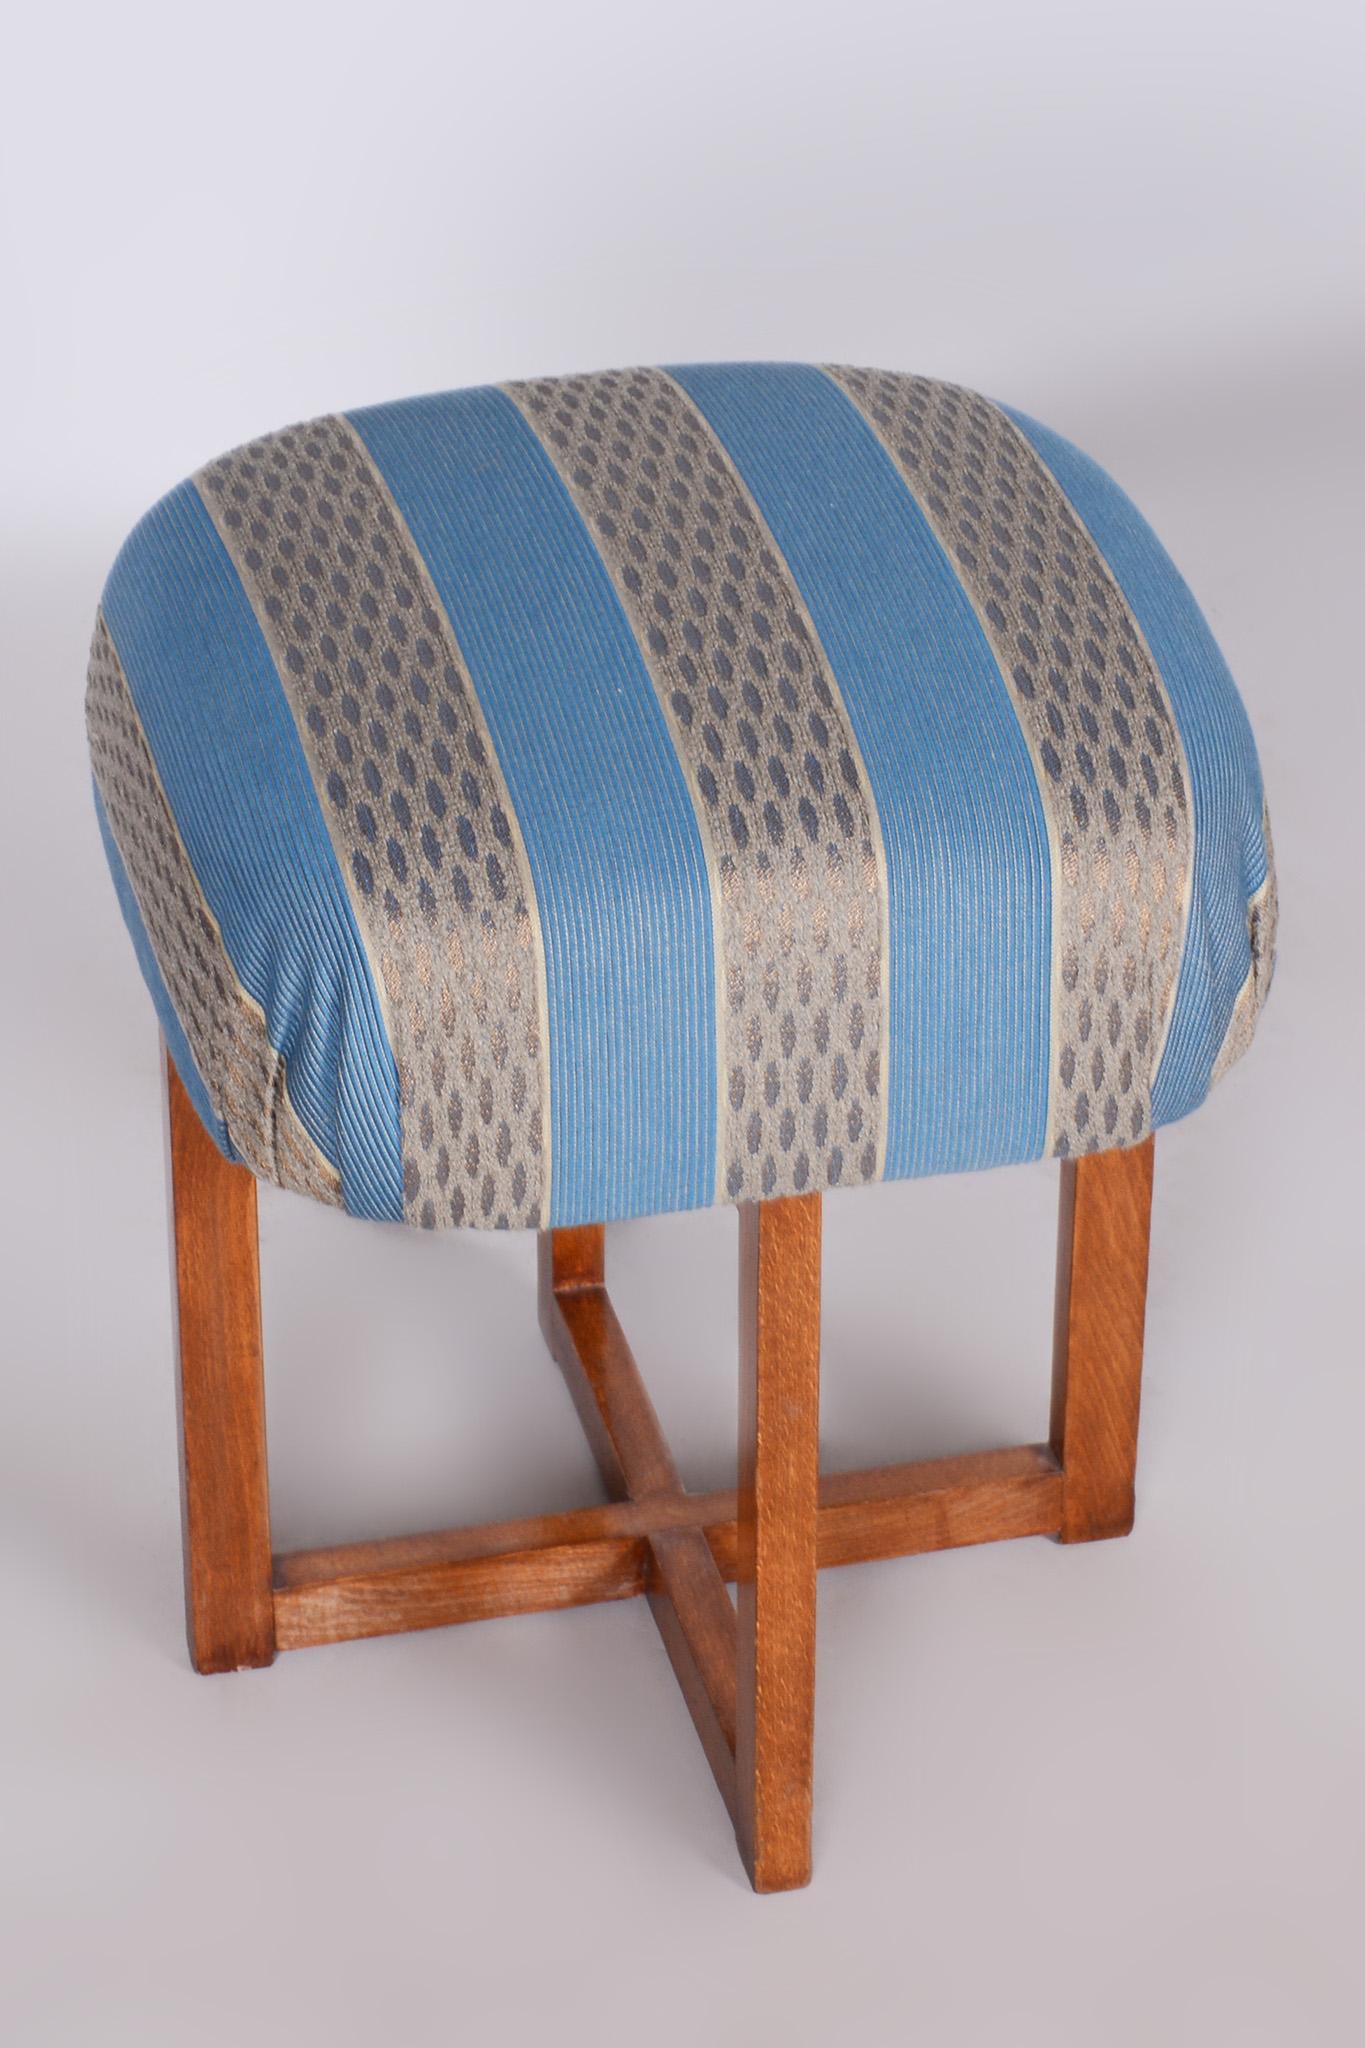 Mid-20th Century Restored Art Deco Beech Stool, New Upholstery, Revived Polish, Czechia, 1930s For Sale